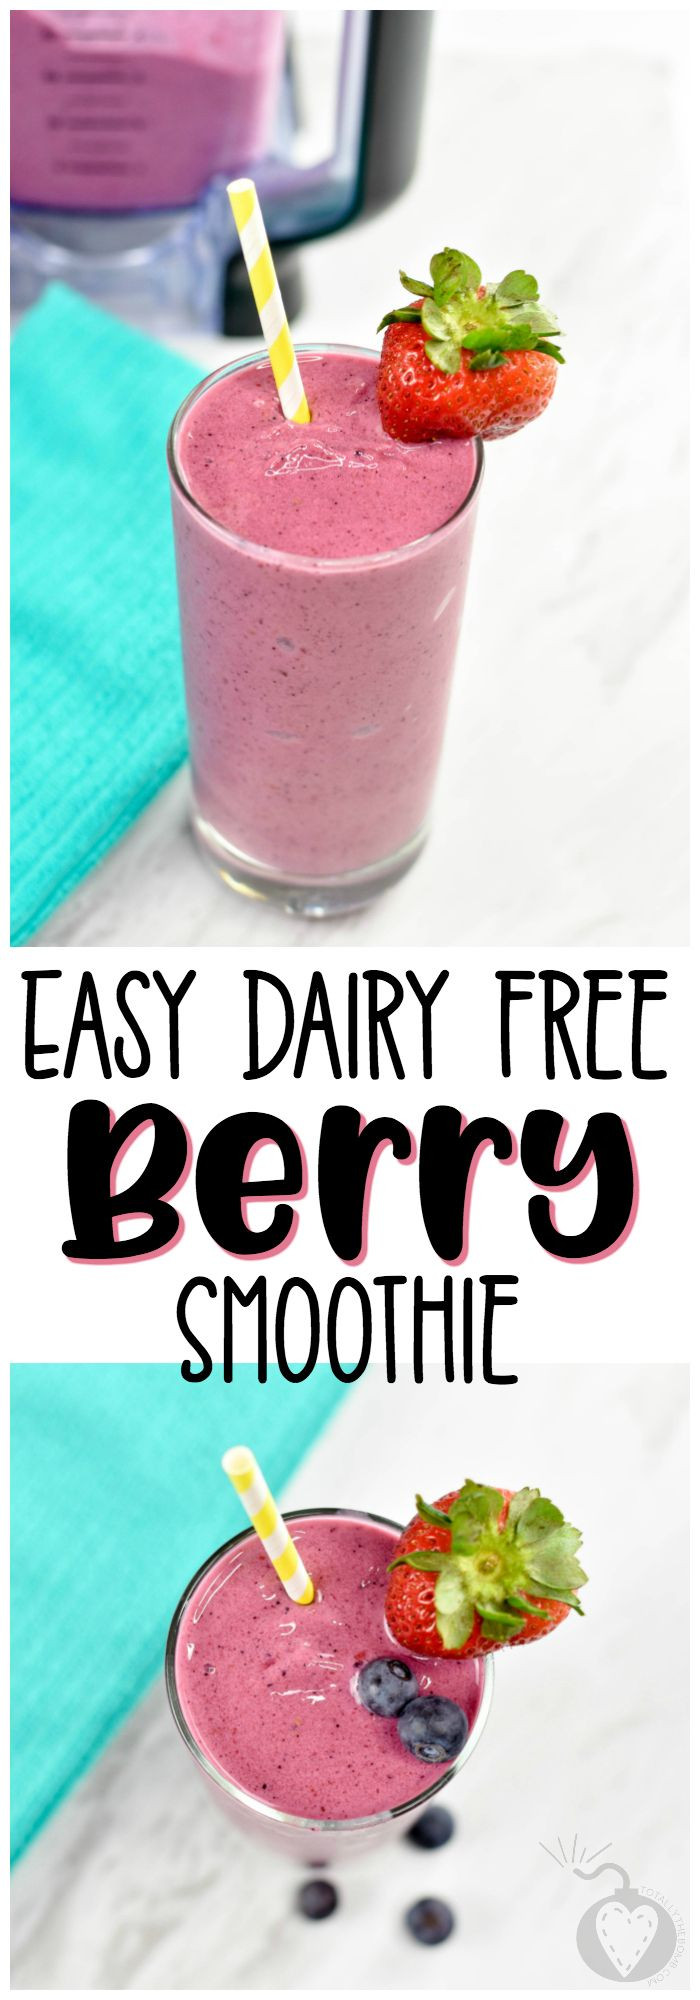 Dairy Free Smoothie Recipes
 Easy Dairy Free Berry Smoothie With images